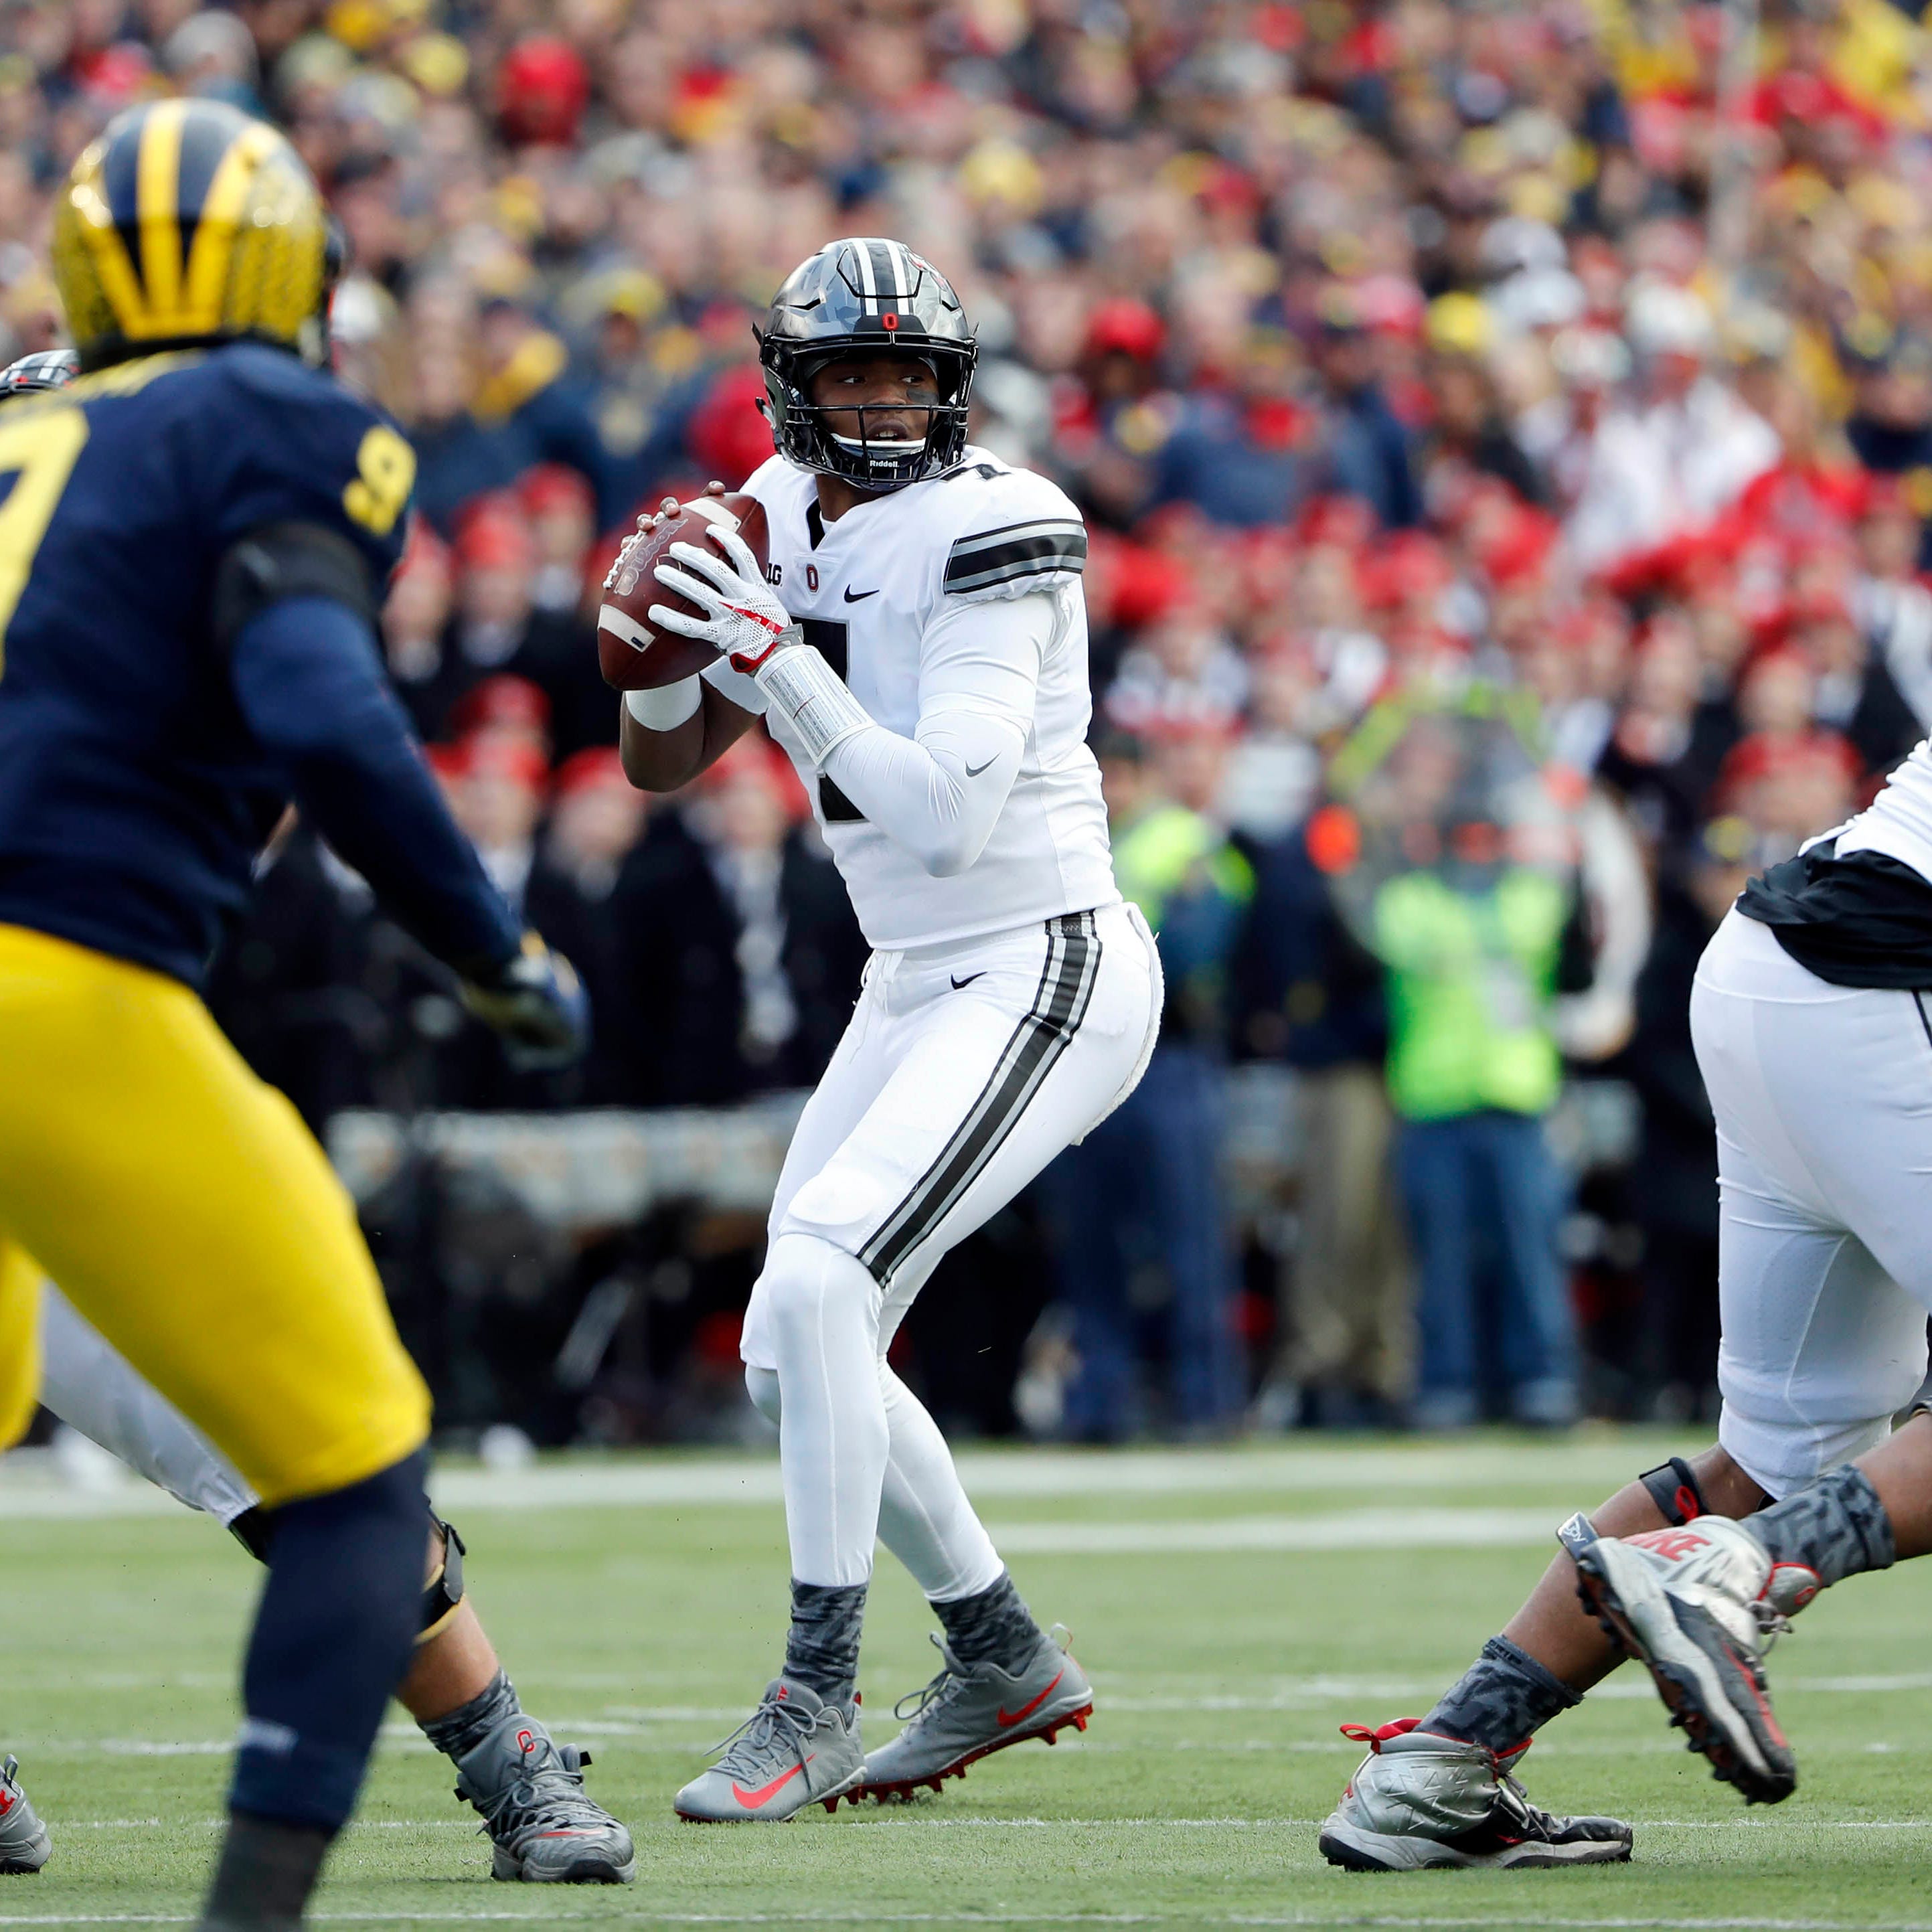 Ohio State quarterback Dwayne Haskins drops back to pass during the second half against Michigan.